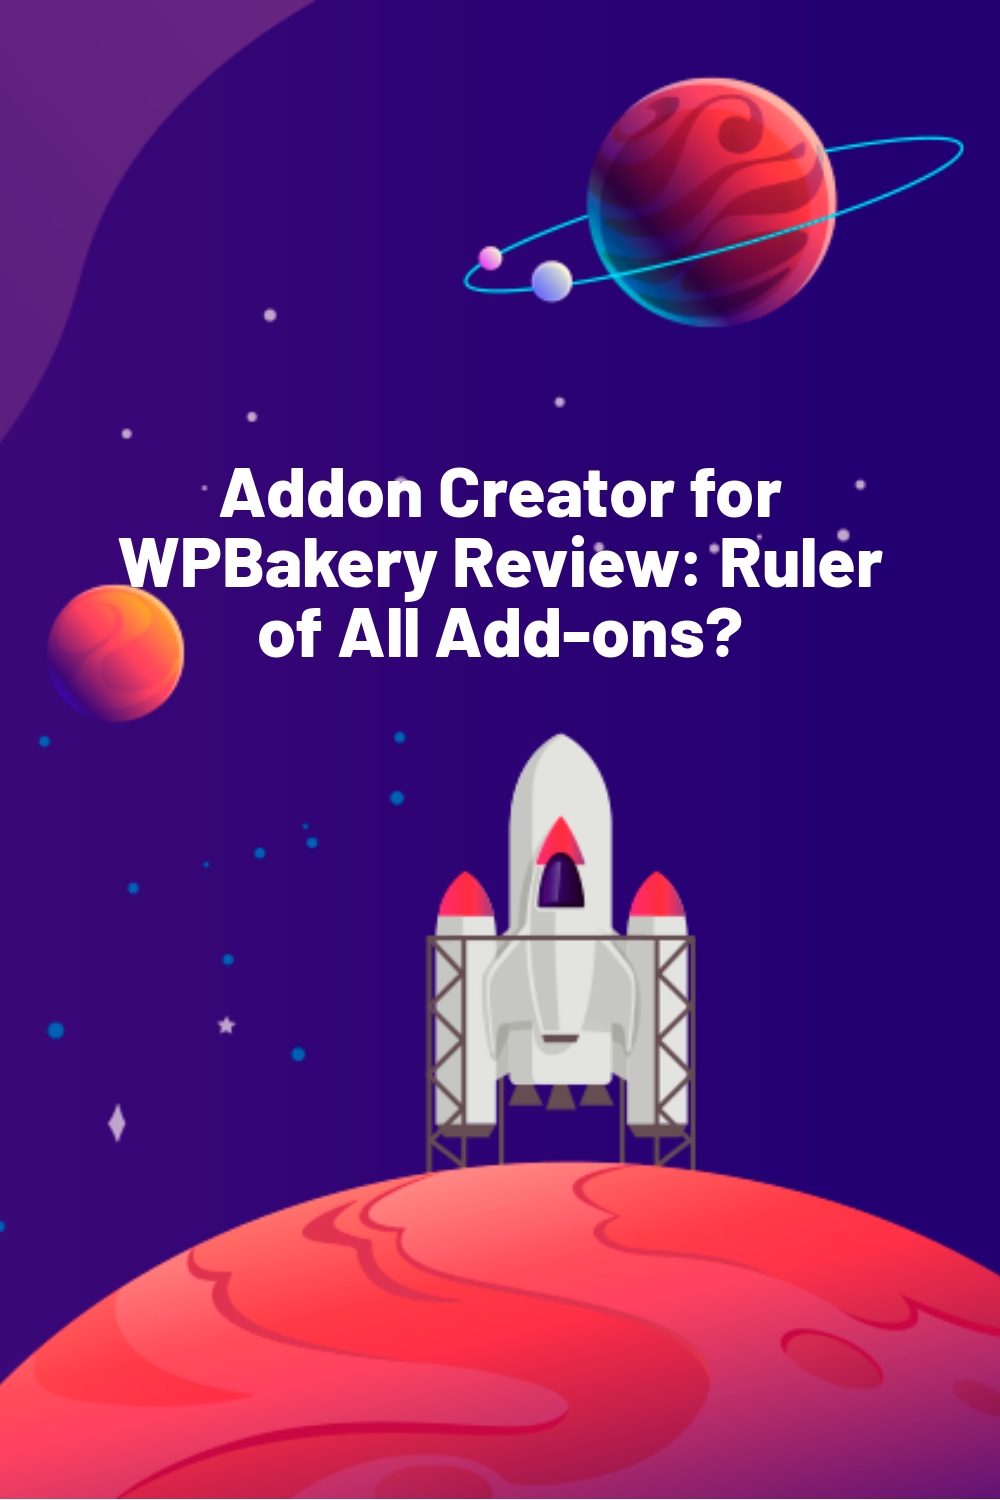 Addon Creator for WPBakery Review: Ruler of All Add-ons?